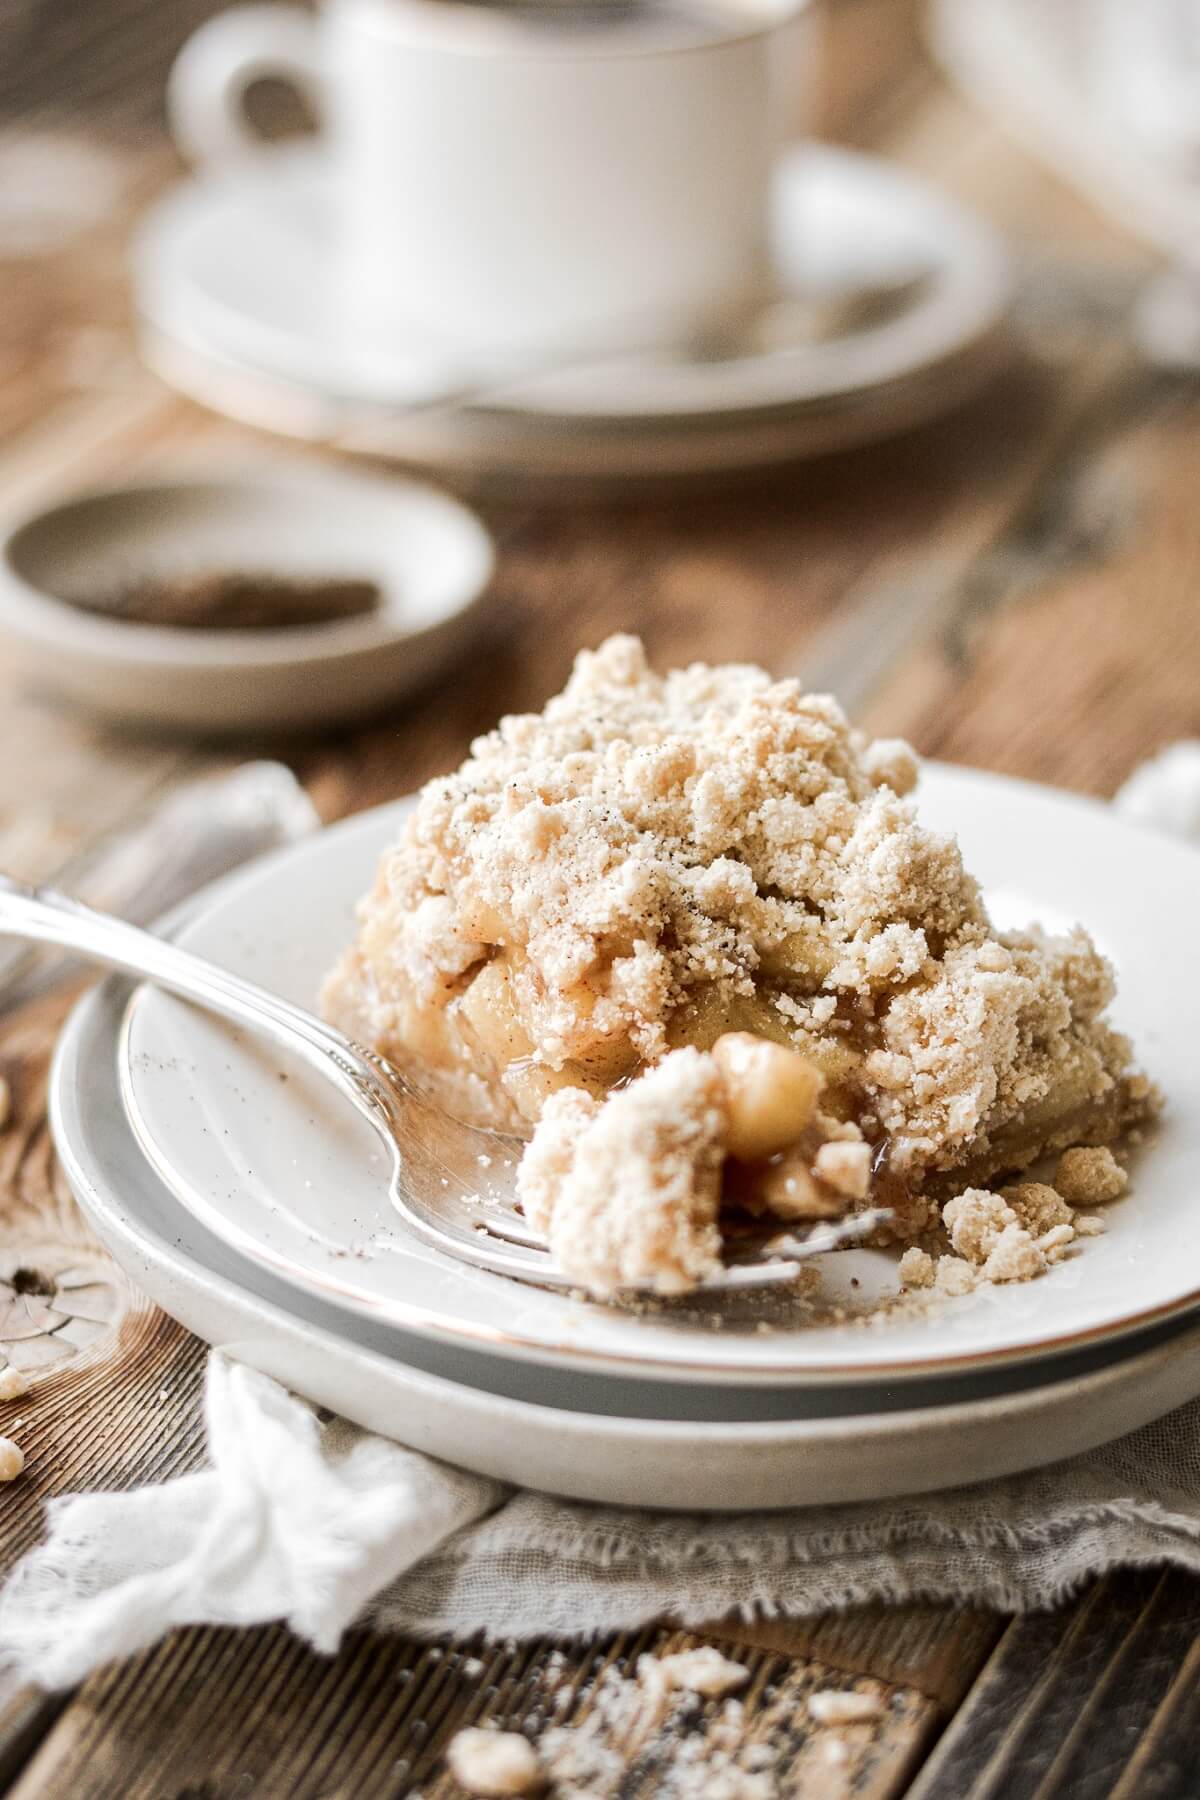 Apple crumb pie bar on a plate.